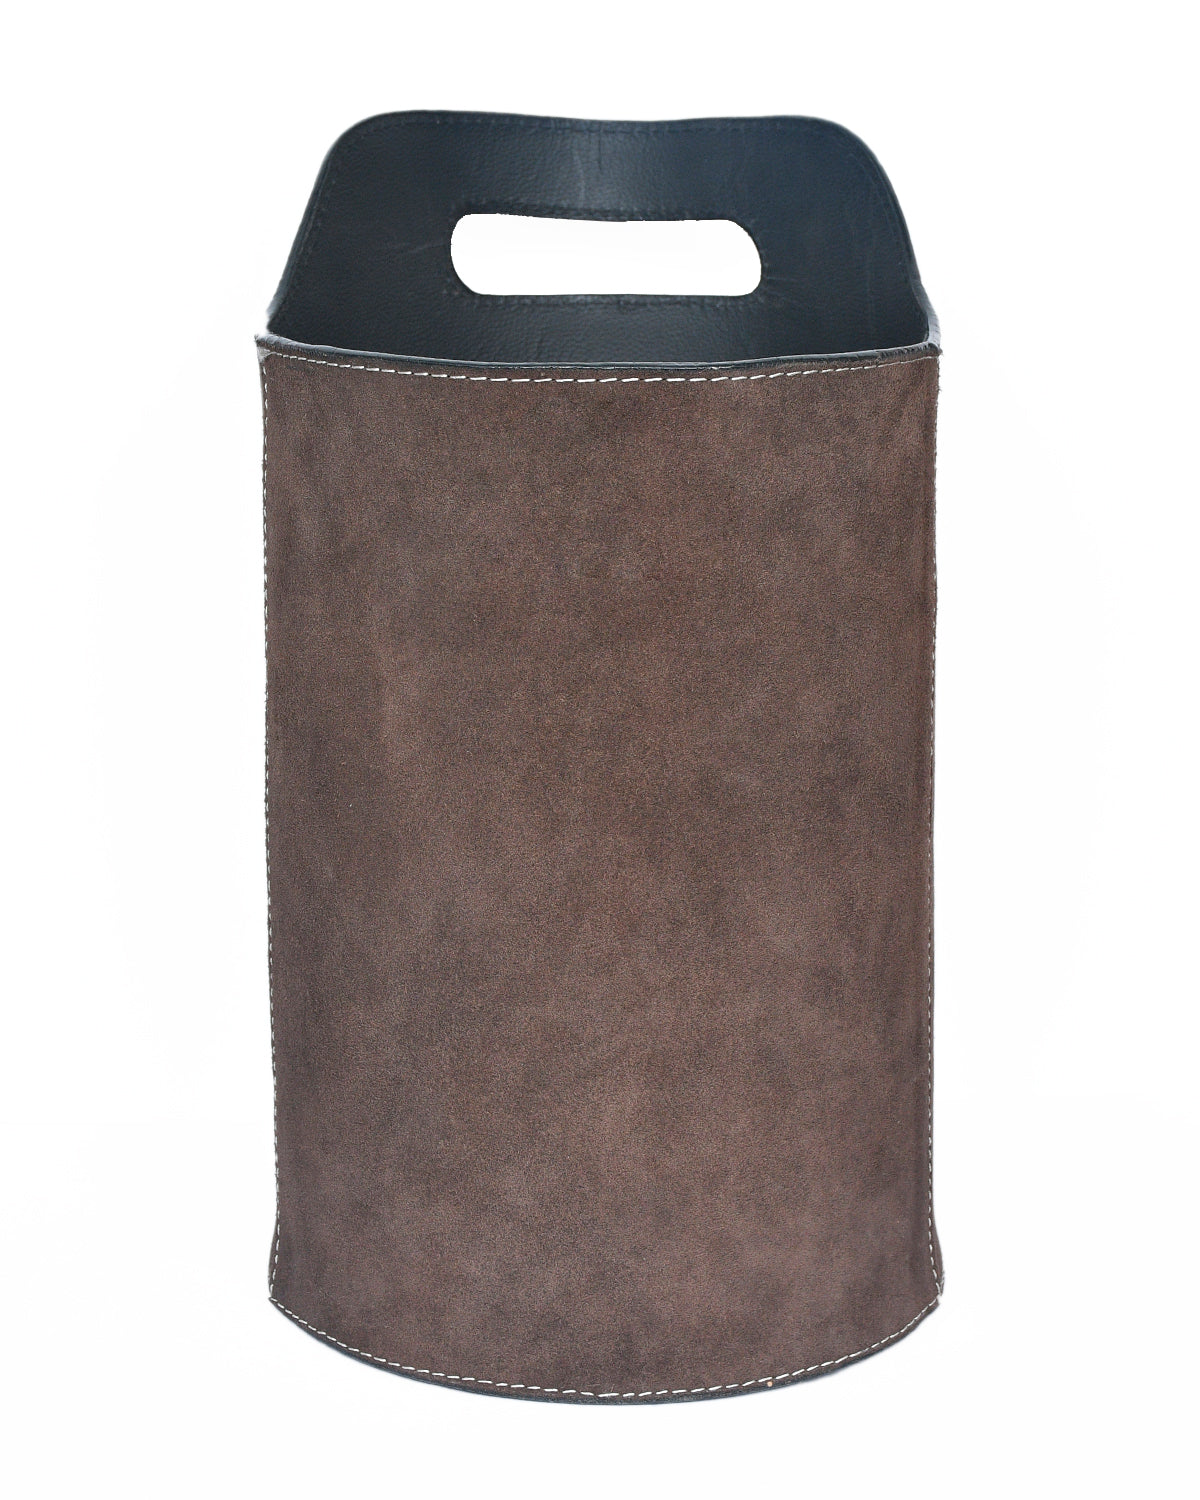 Celtic new pure leather dustbin for office use - CELTICINDIA